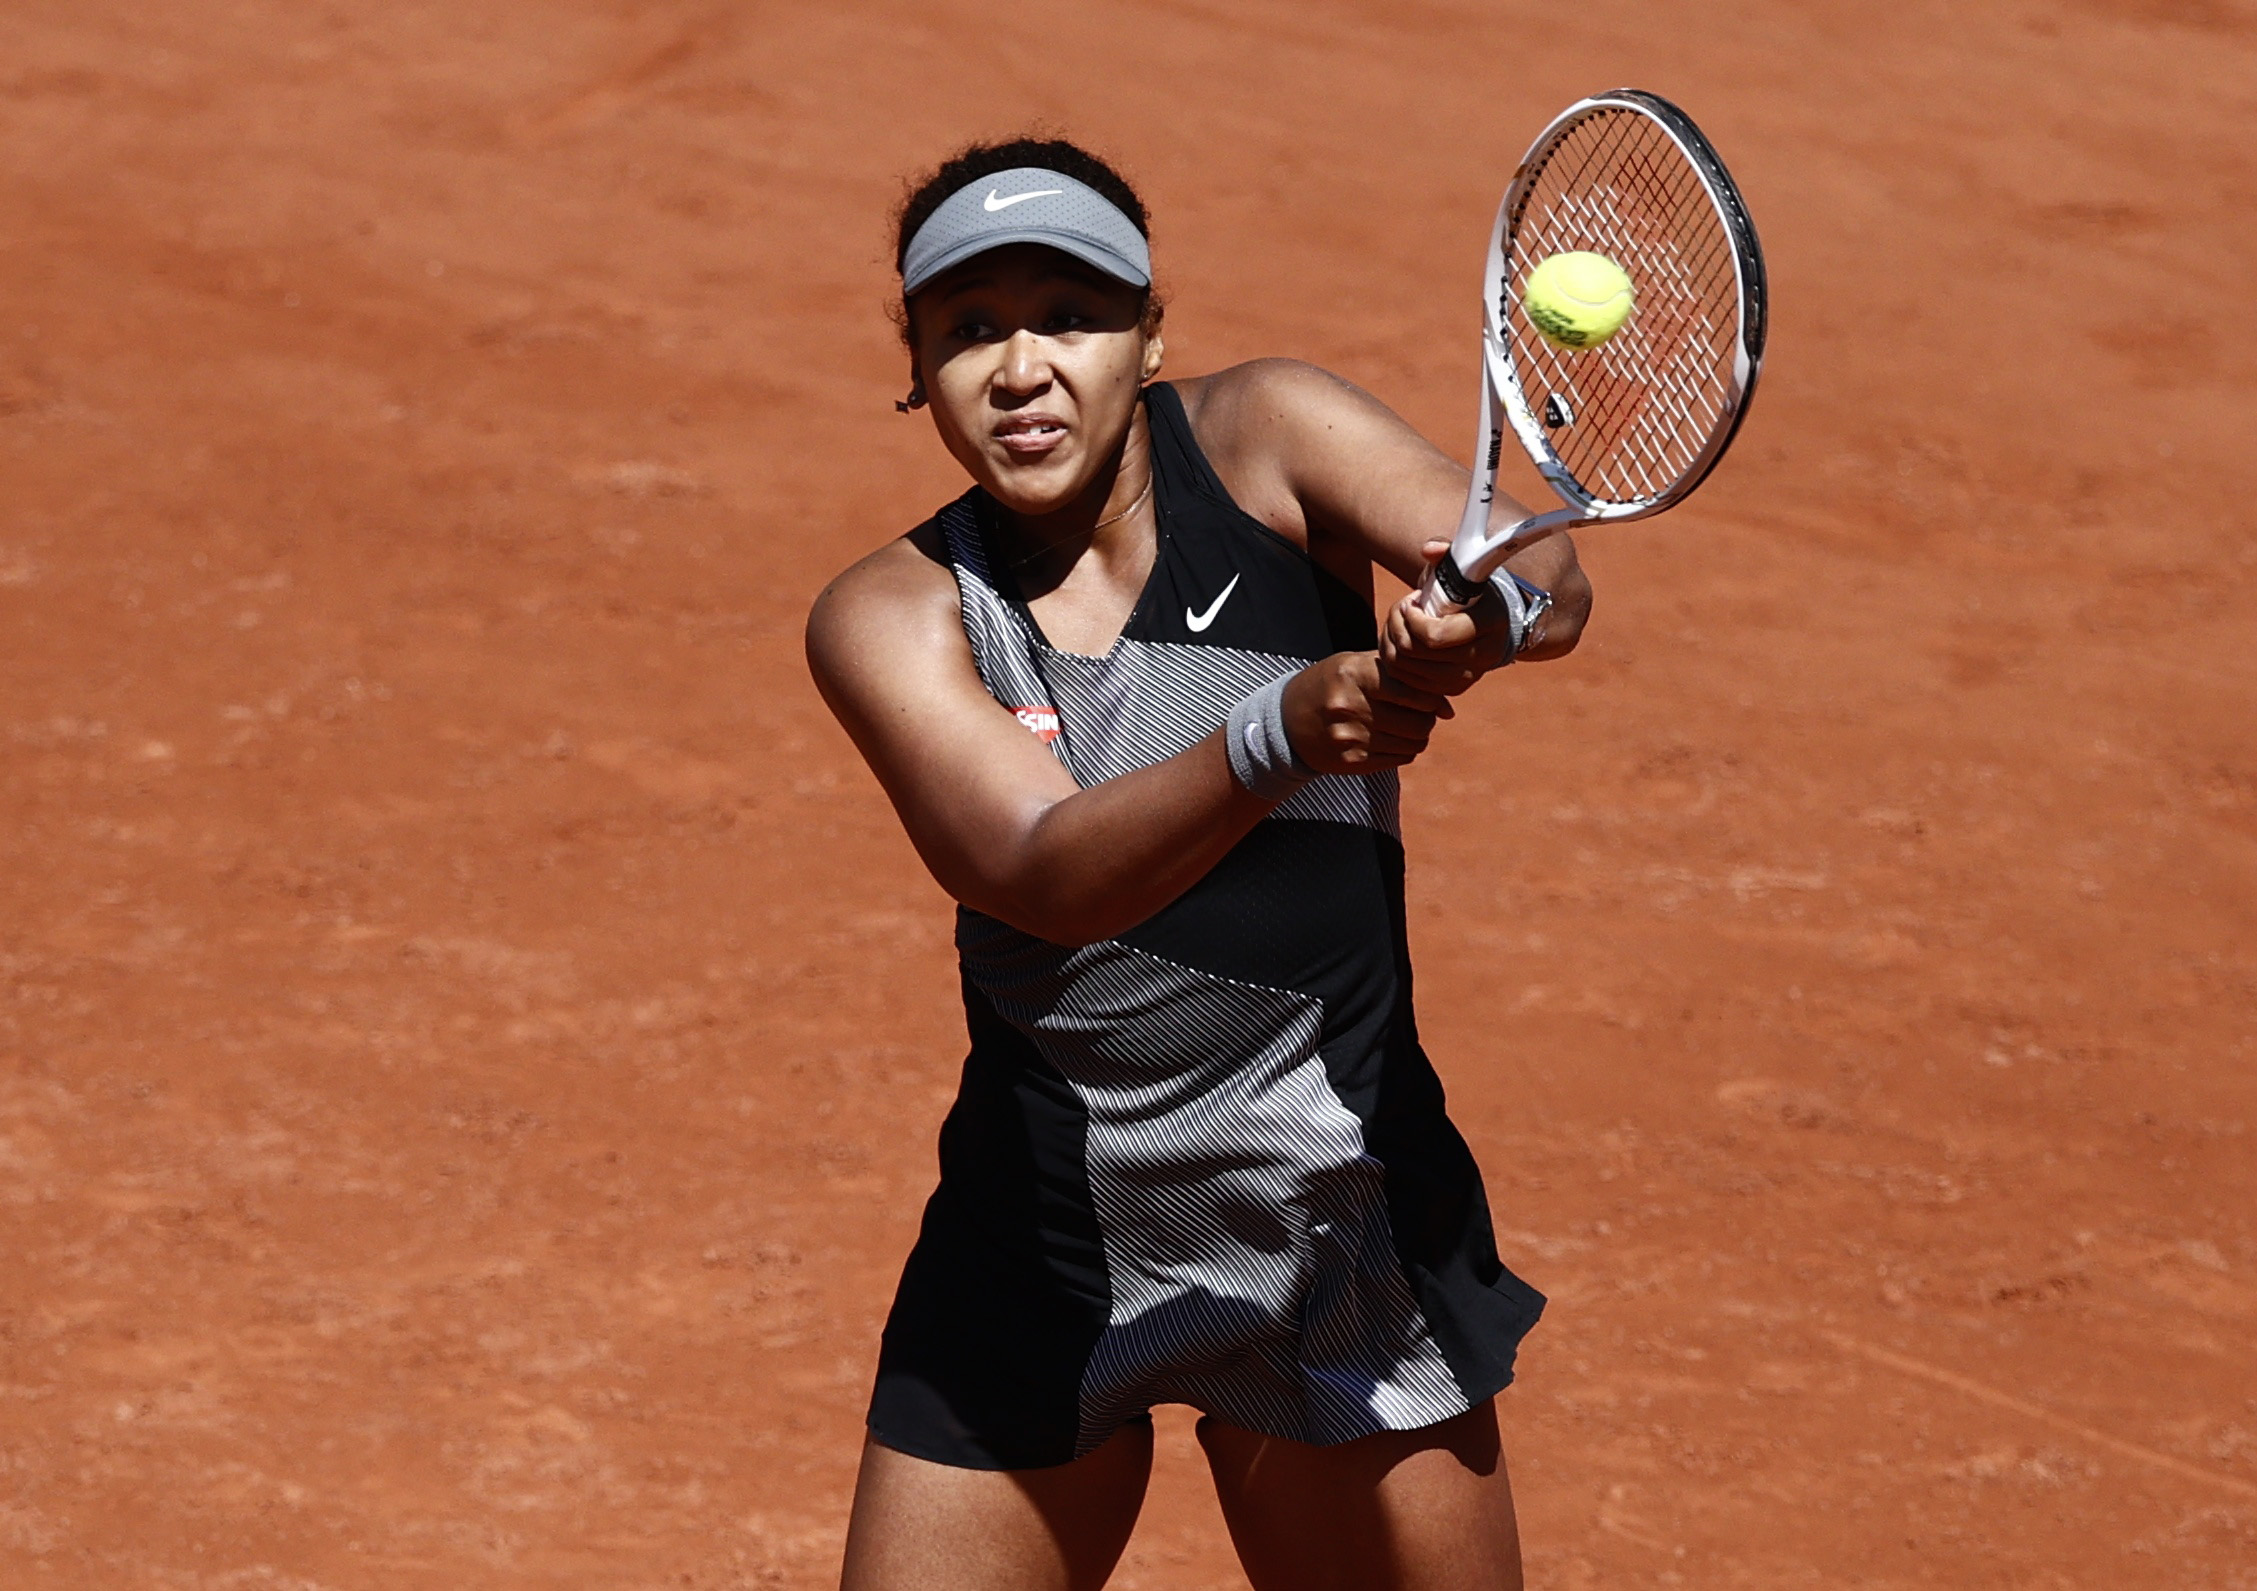 JUST IN: Naomi Osaka Withdraws From French Open, Citing Mental Health Concerns